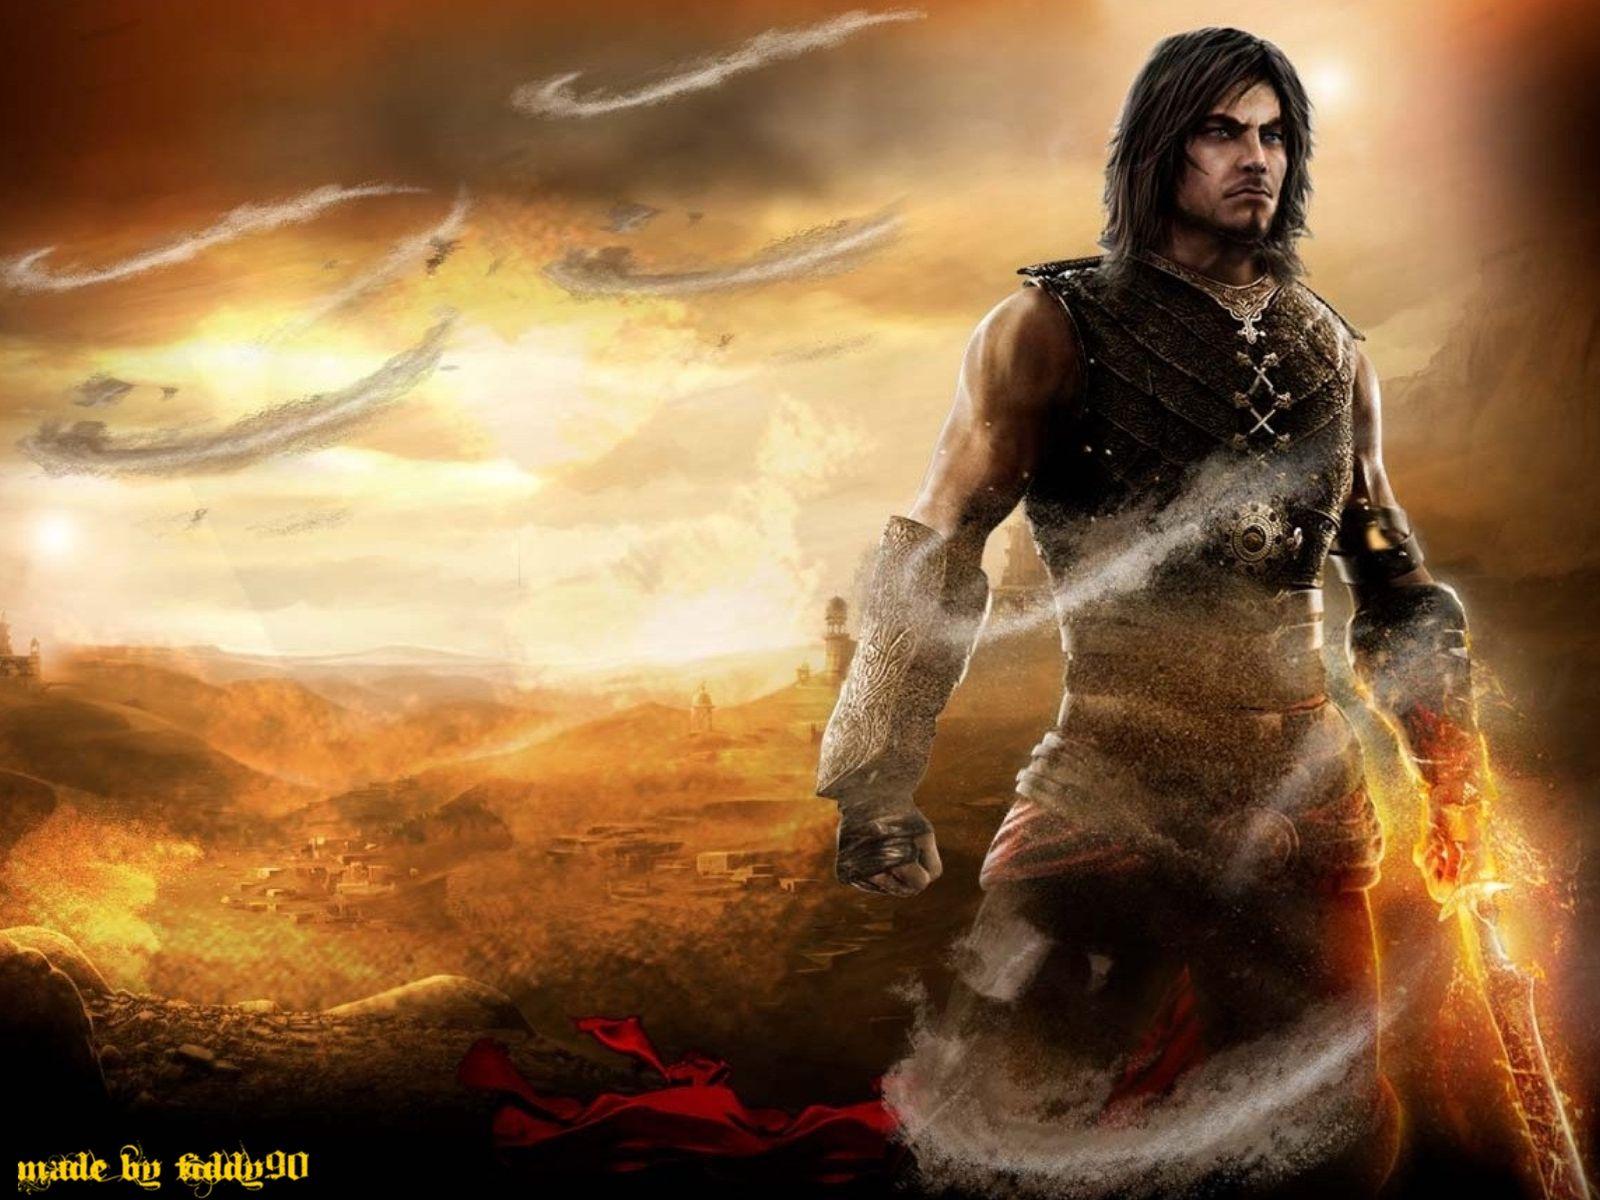 Prince Of Persia: The Forgotten Sands HD Wallpaper 2 X 1200